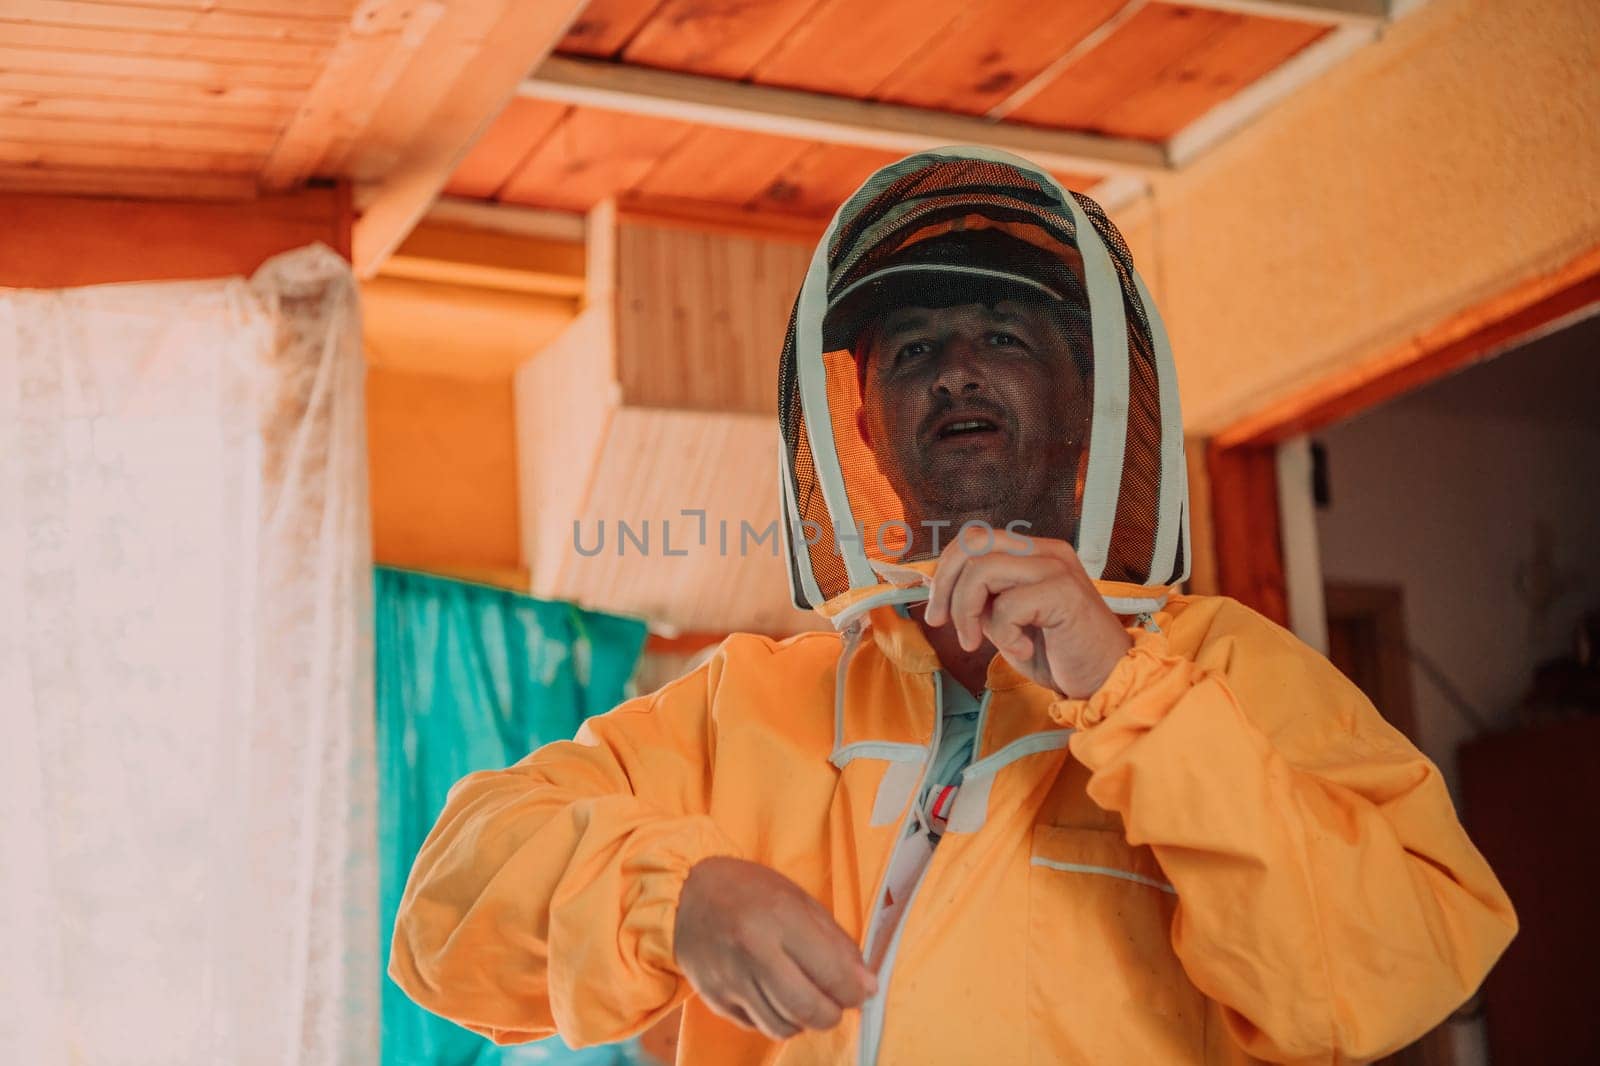 Beekeeper put on a protective beekeeping suit and preparing to enter the apiary by dotshock